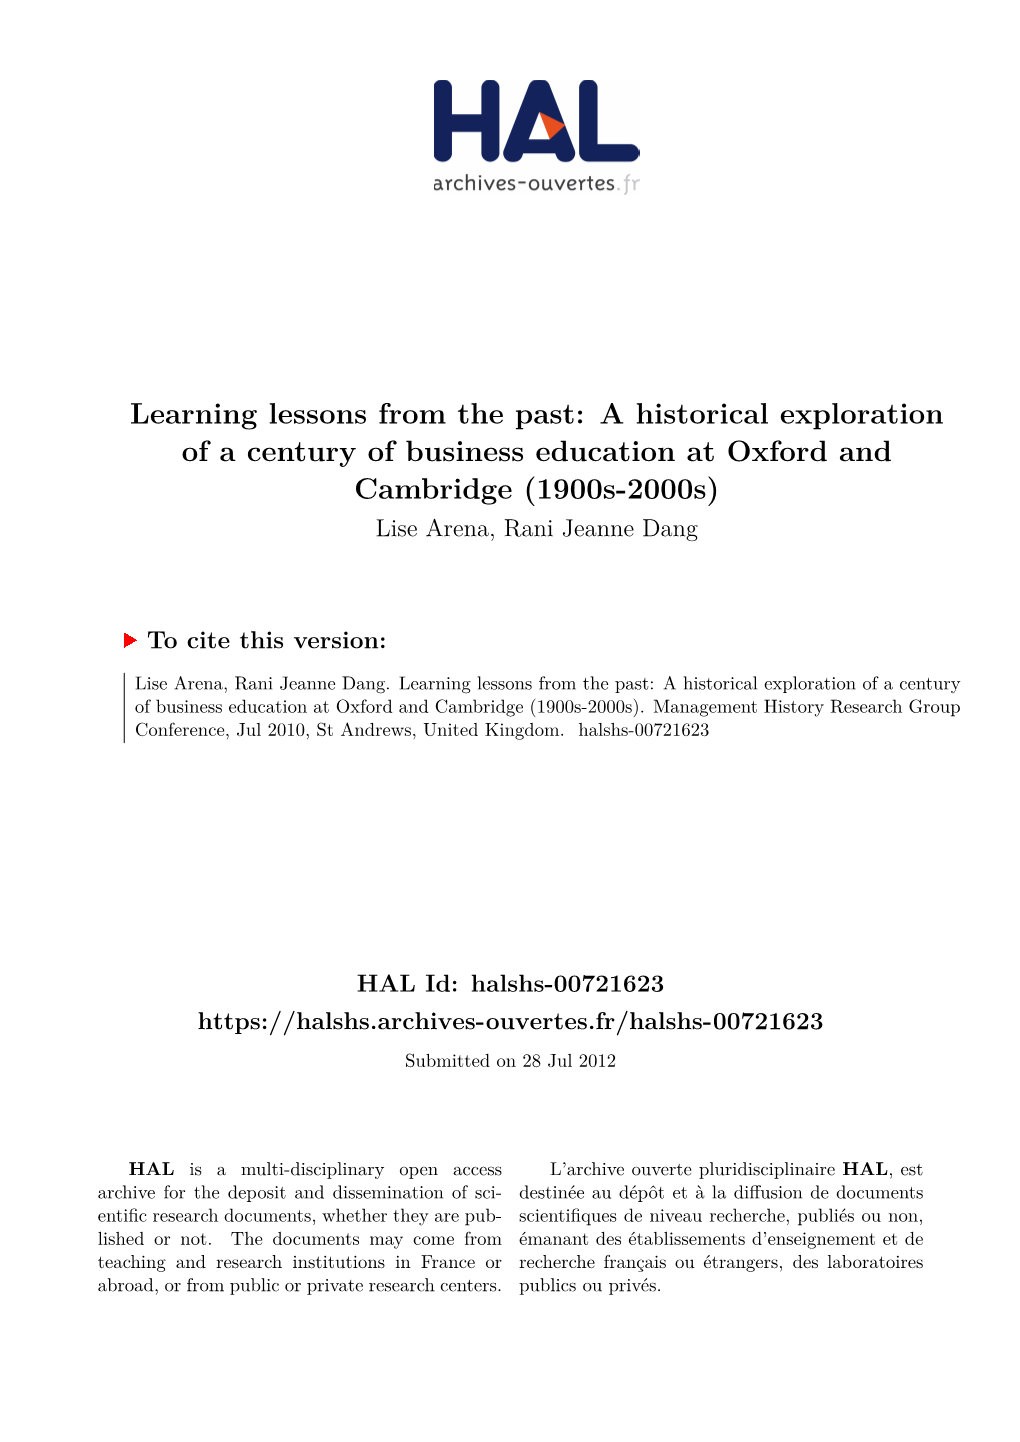 A Historical Exploration of a Century of Business Education at Oxford and Cambridge (1900S-2000S) Lise Arena, Rani Jeanne Dang